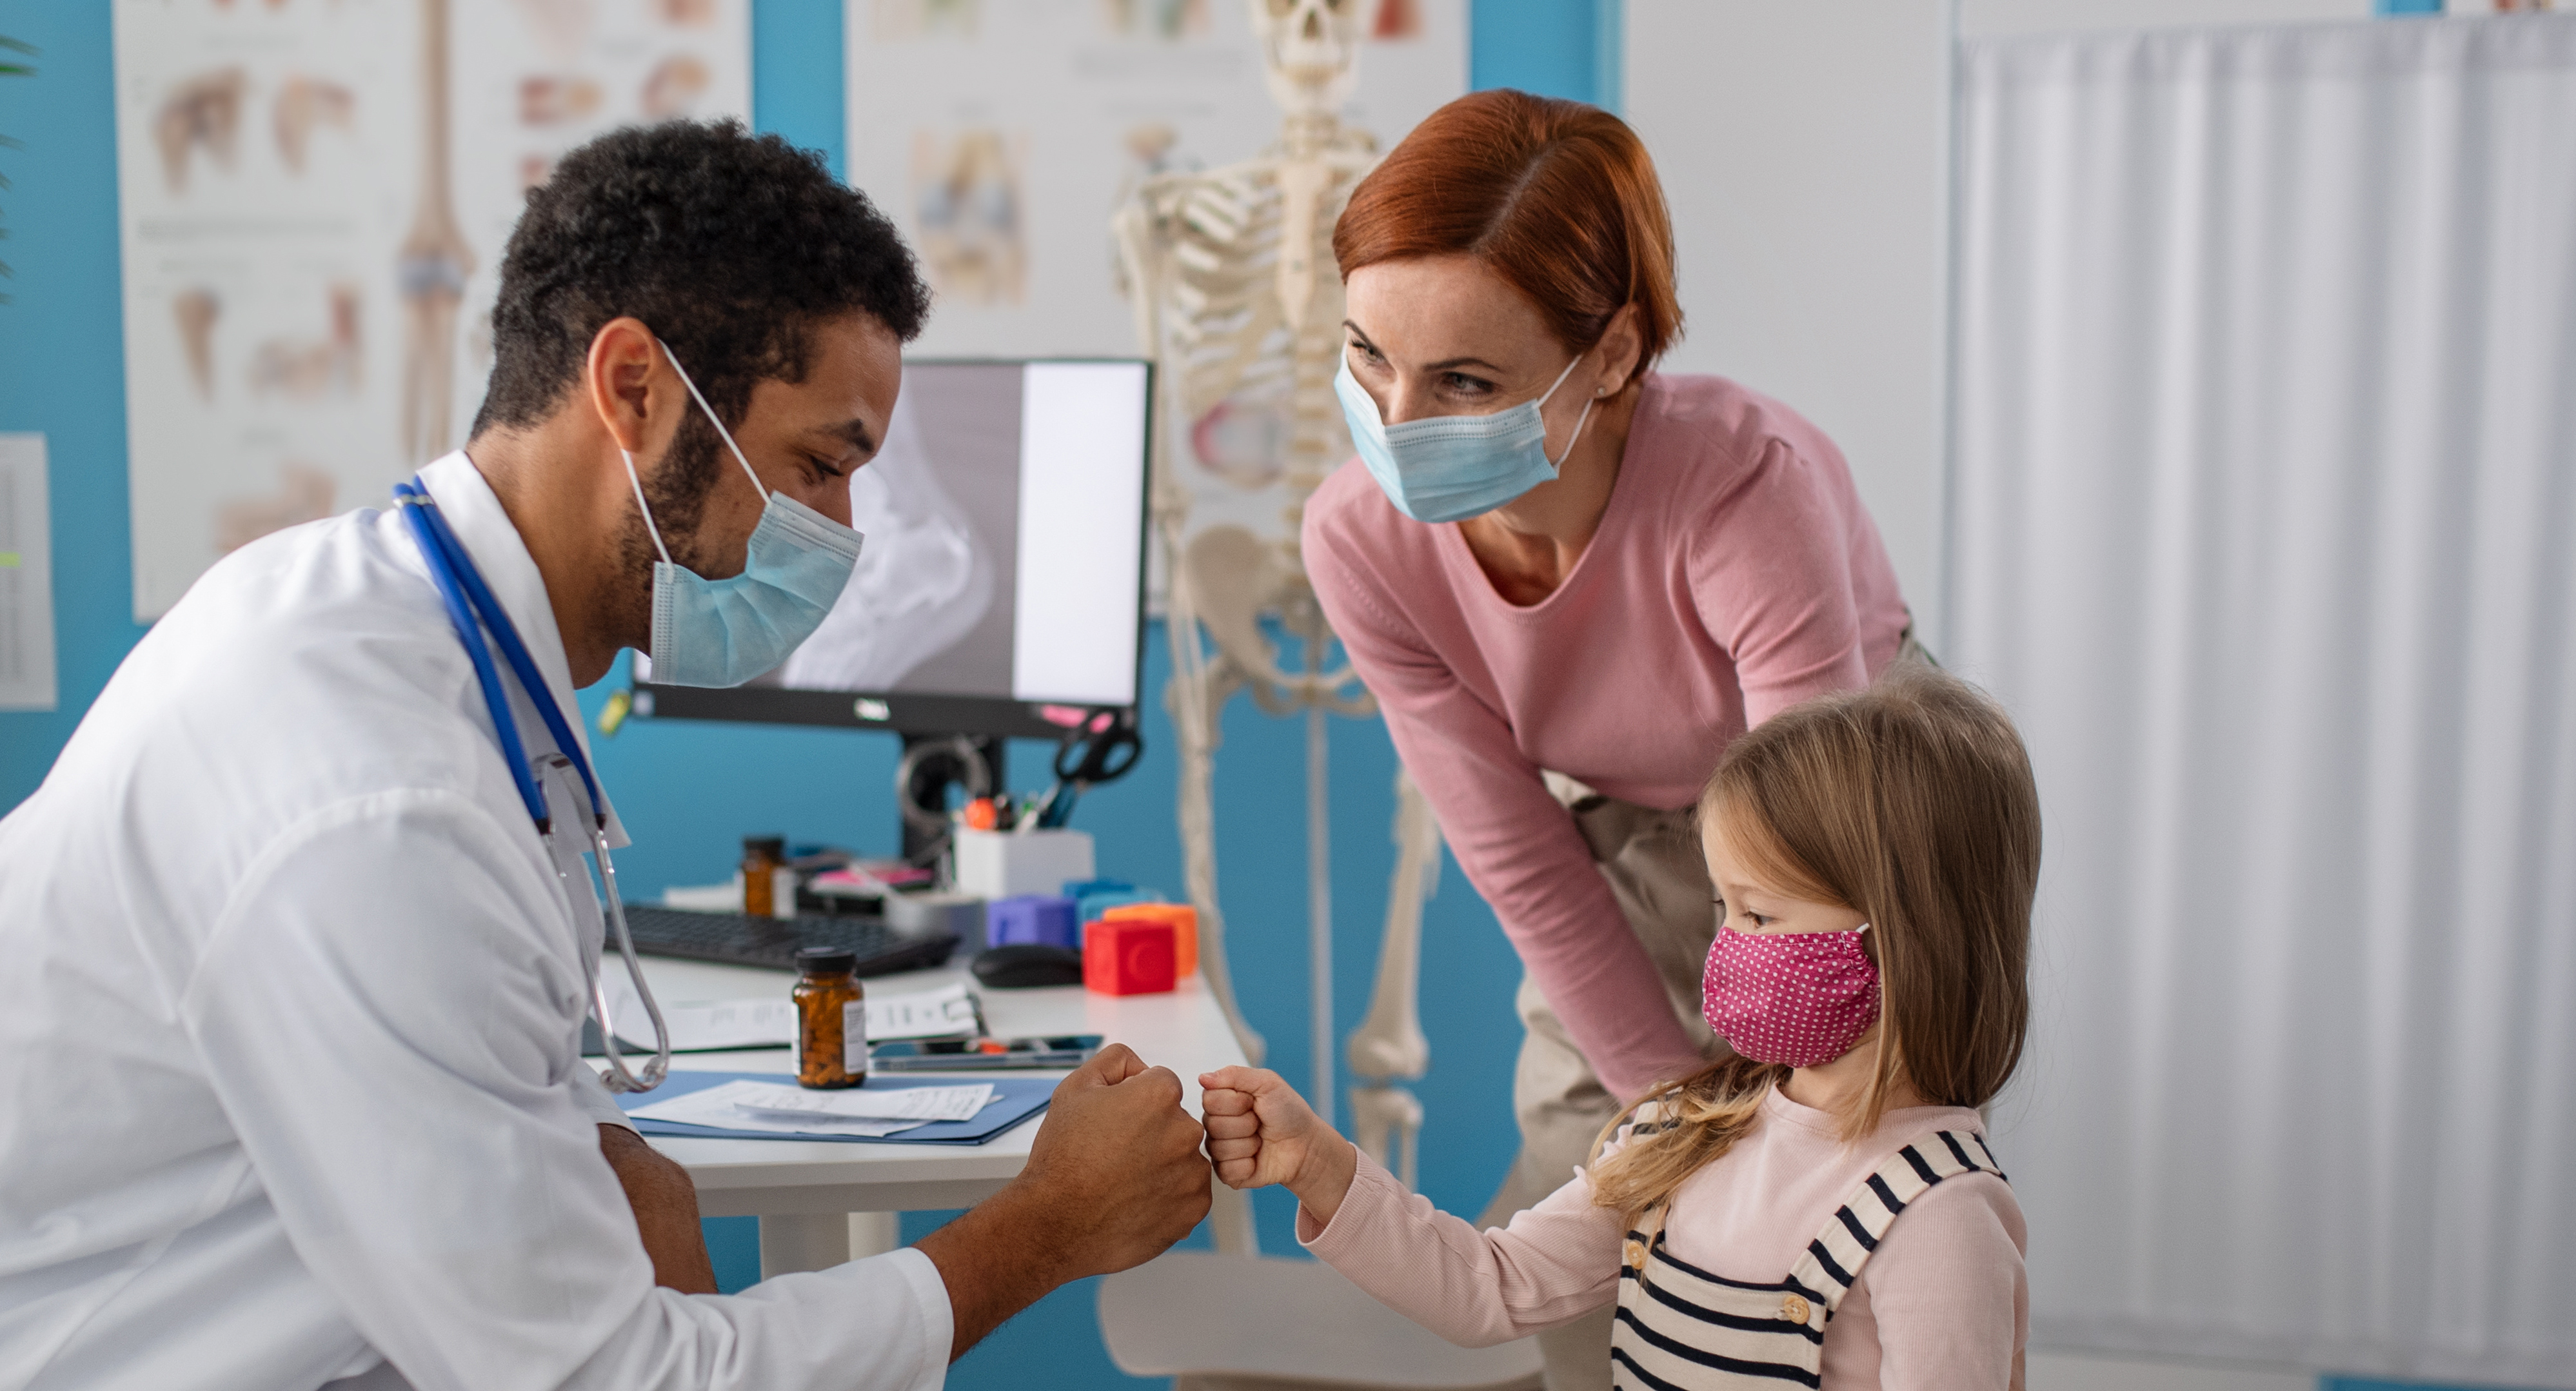 Little girl fist bumps with male doctor while her mother looks on. All three are wearing masks.